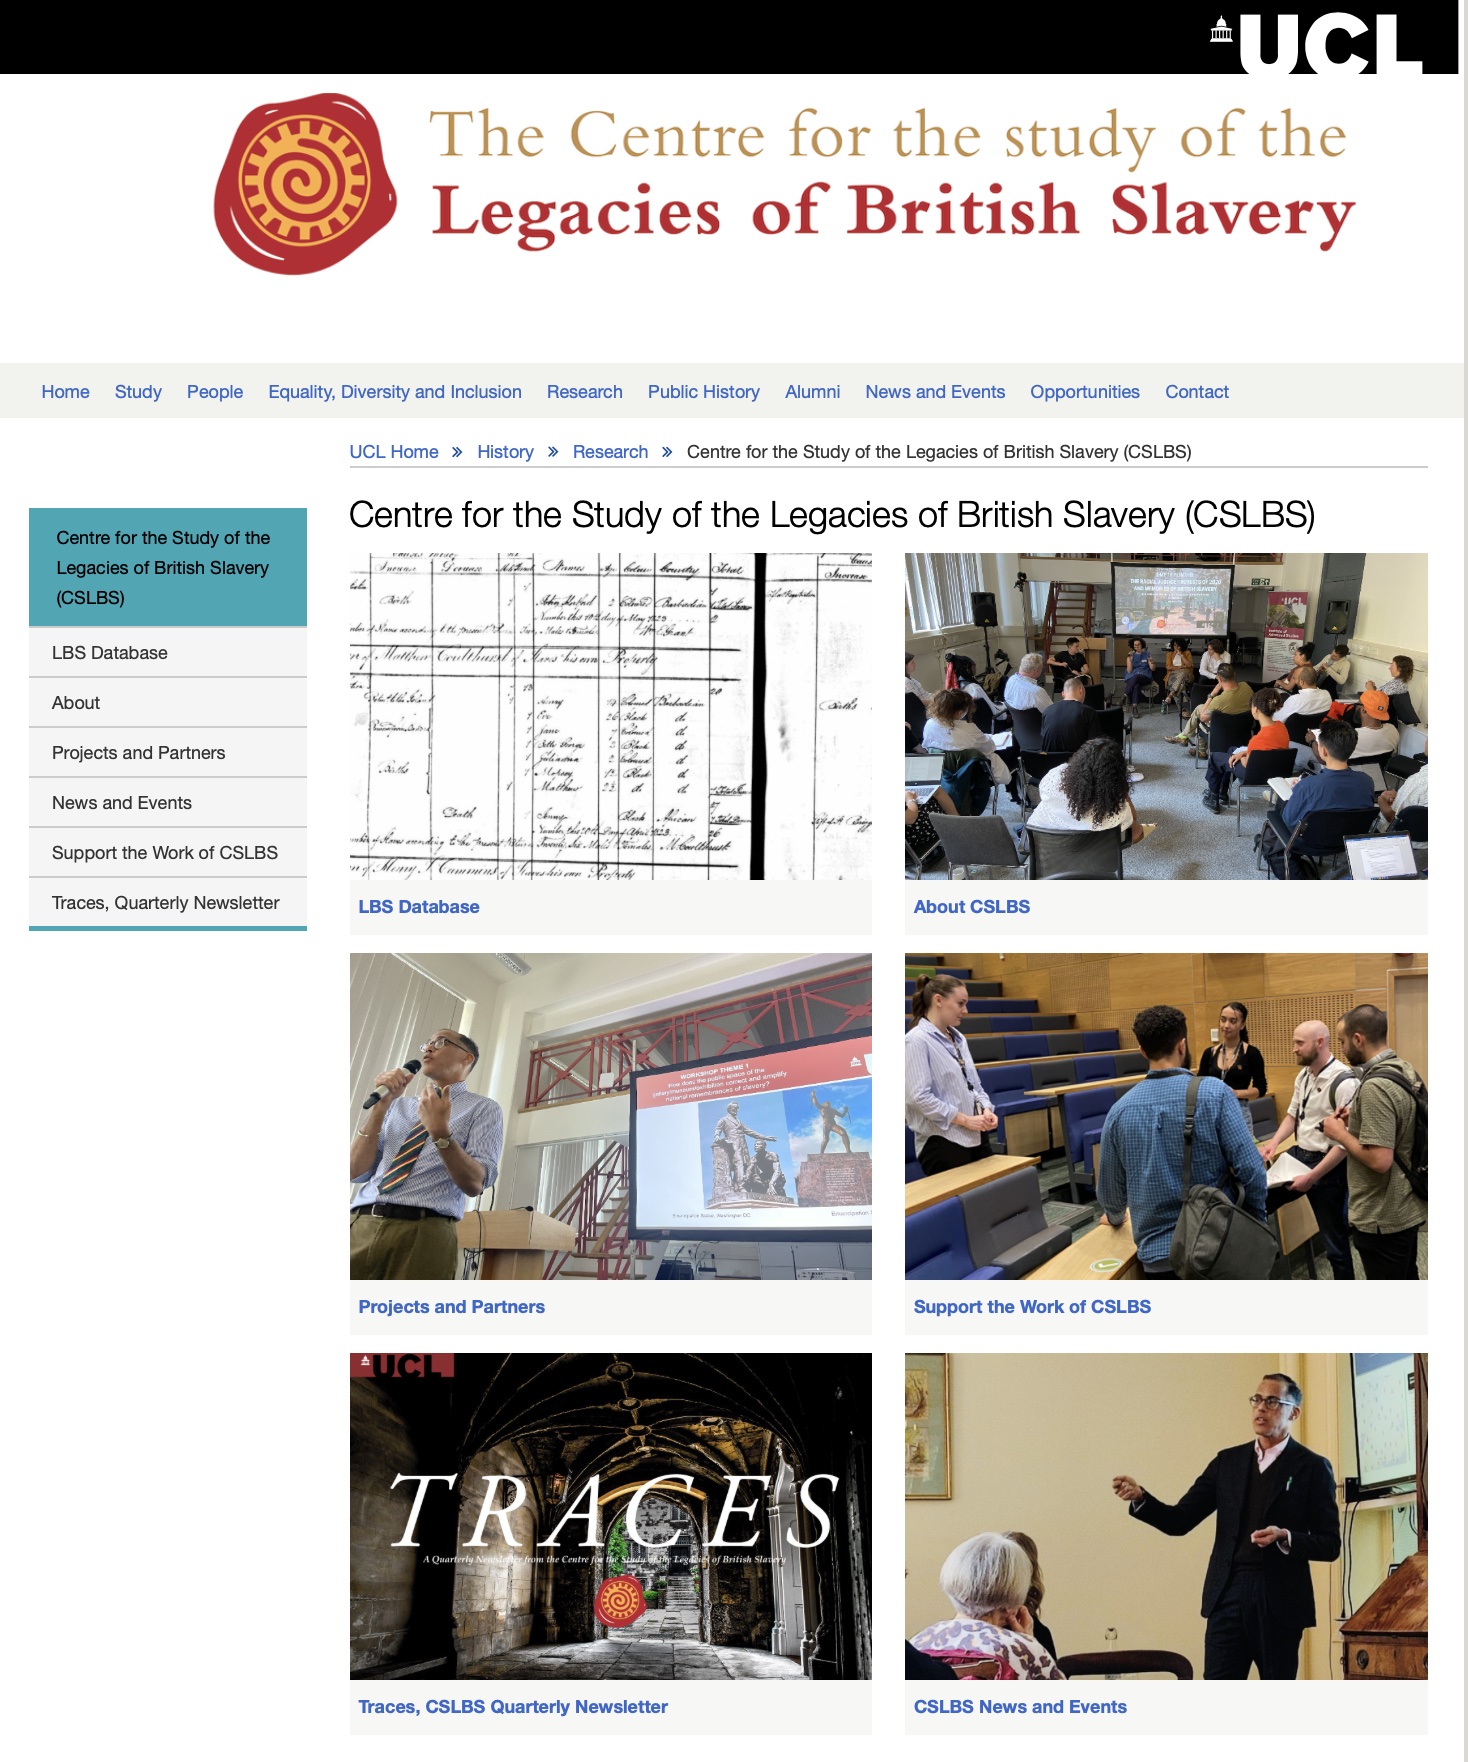 The Centre for the Study of the Legacies of British Slavery